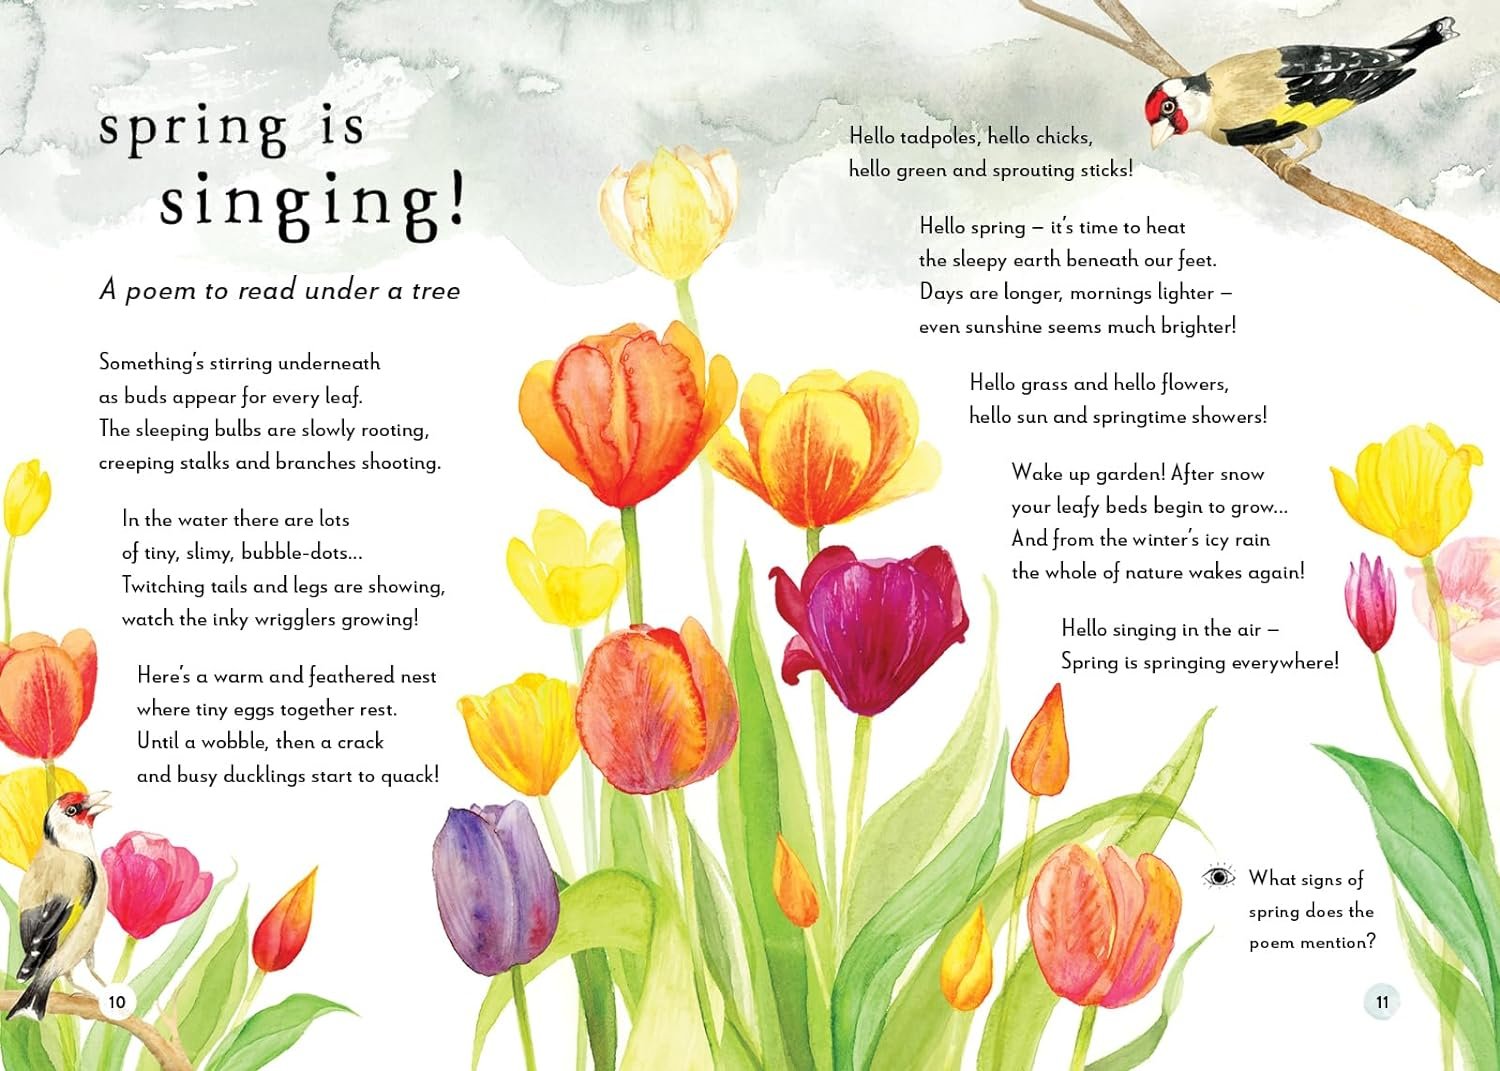 A Field Guide to Spring_excerpt 4_Spring is Springing.jpg